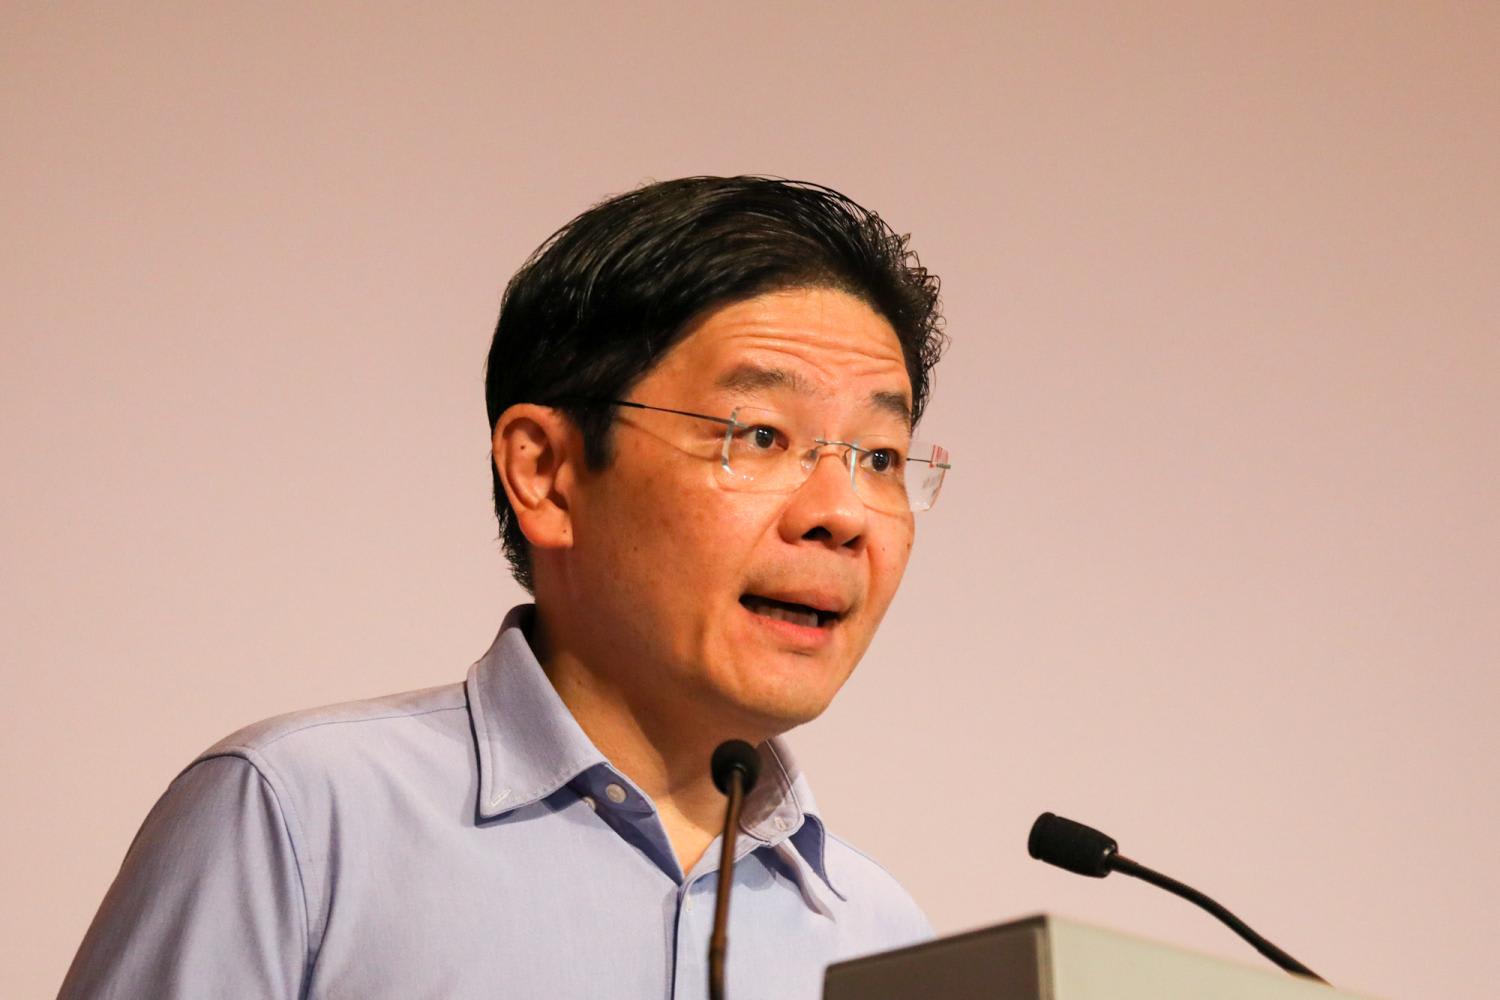 Deputy Prime Minister Lawrence Wong (pictured) will be accompanied by officials from the Ministry of Finance and the Monetary Authority of Singapore on a work trip to Bali, Indonesia.